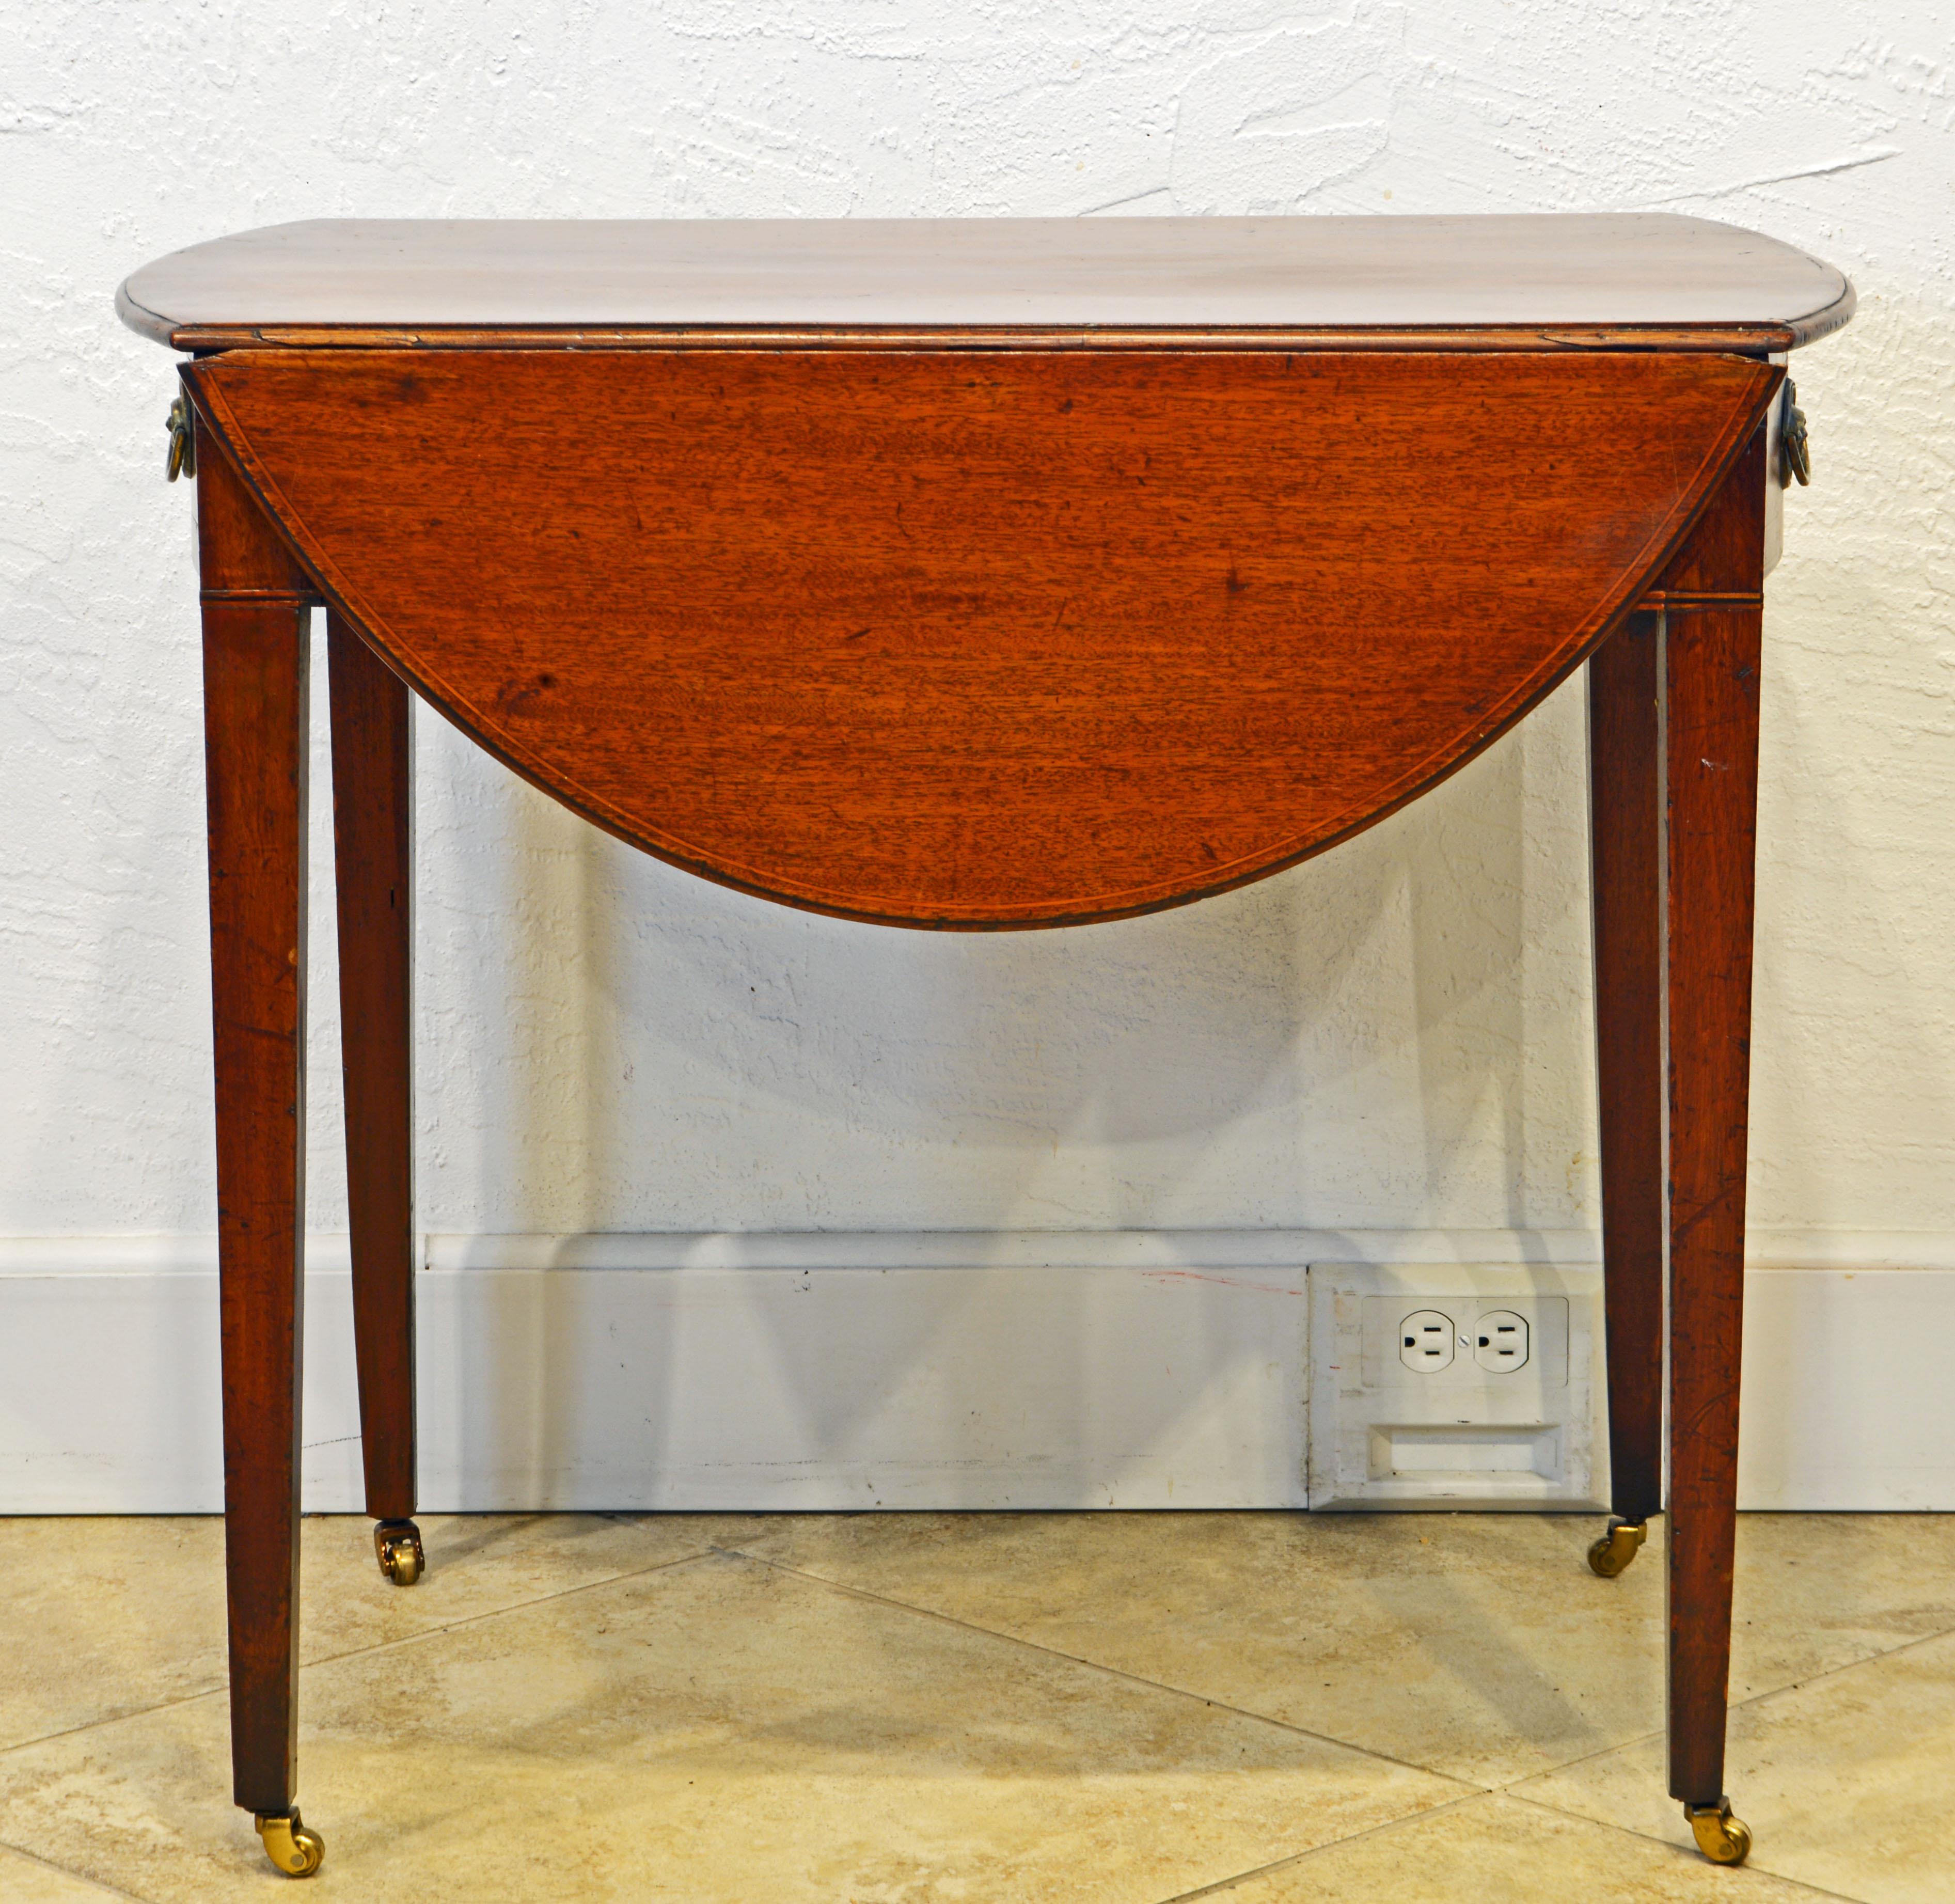 This Classic English George III string inlaid mahogany Pembroke table has two drop leaves that fold up making a larger oval table. The bow front end contains a frieze drawer the other end a simulated drawer. The elegant square tapering legs end in